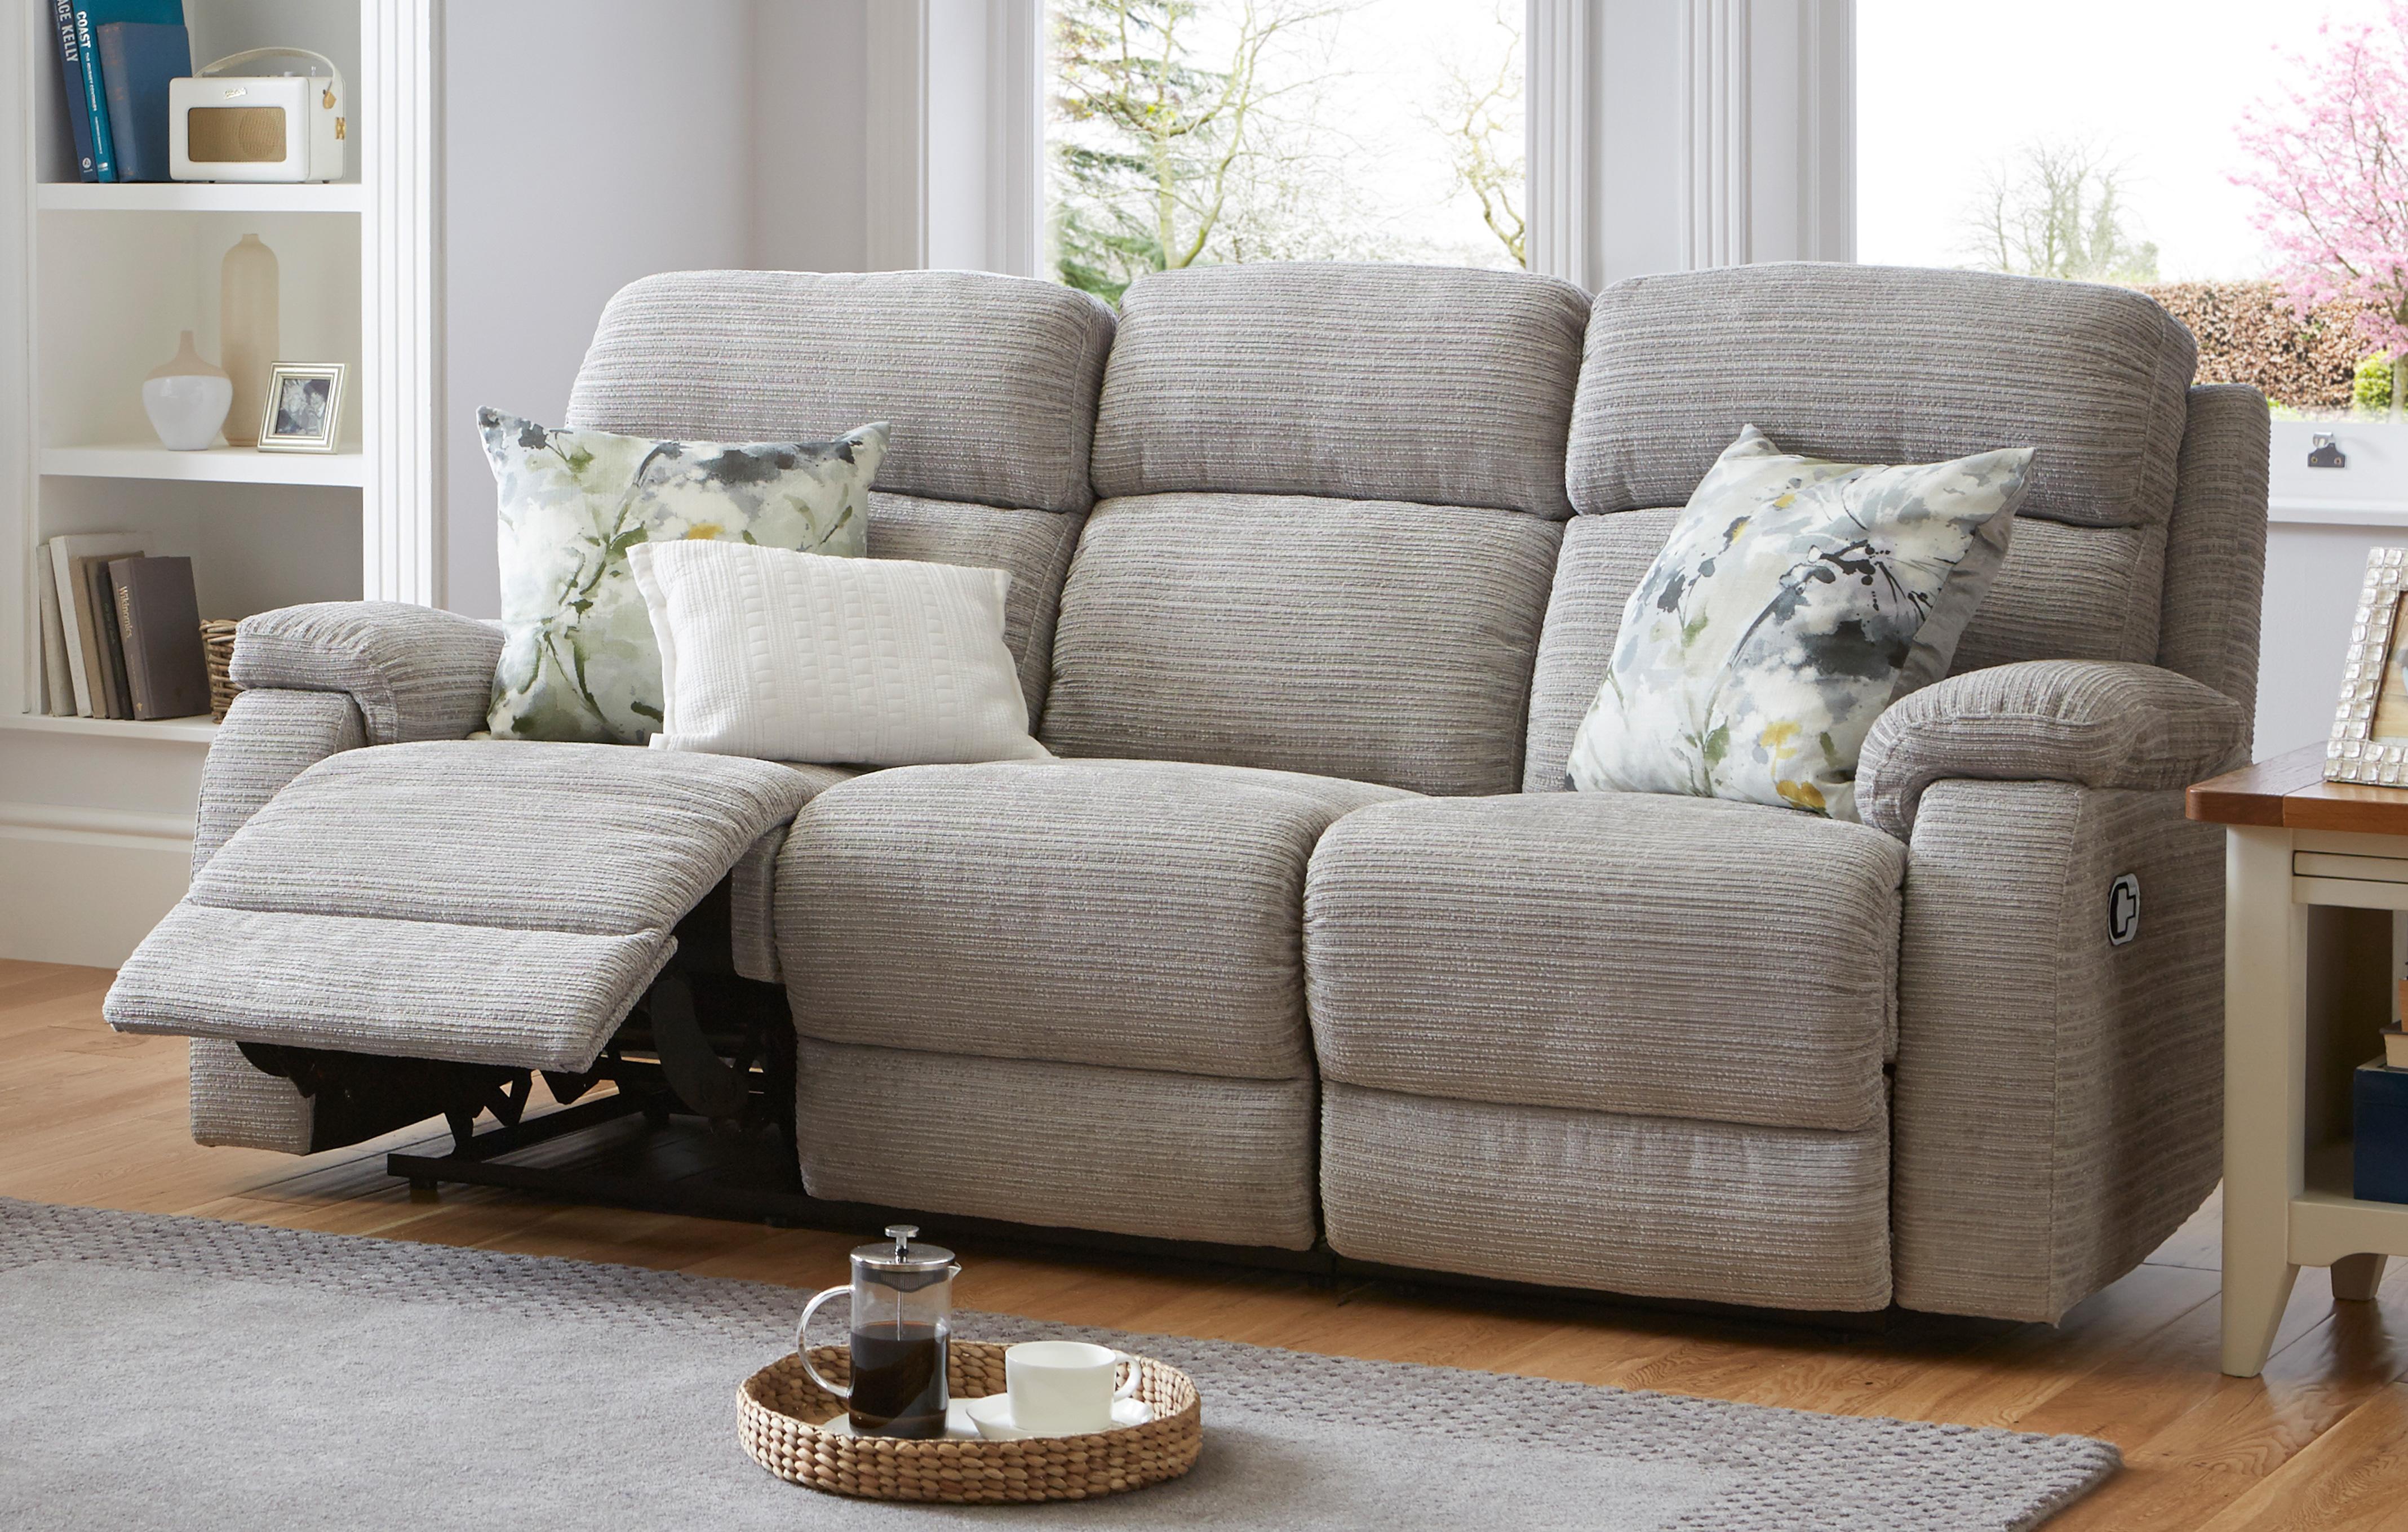 Fabric Recliner Sofas In A Range Of Styles | DFS Ireland